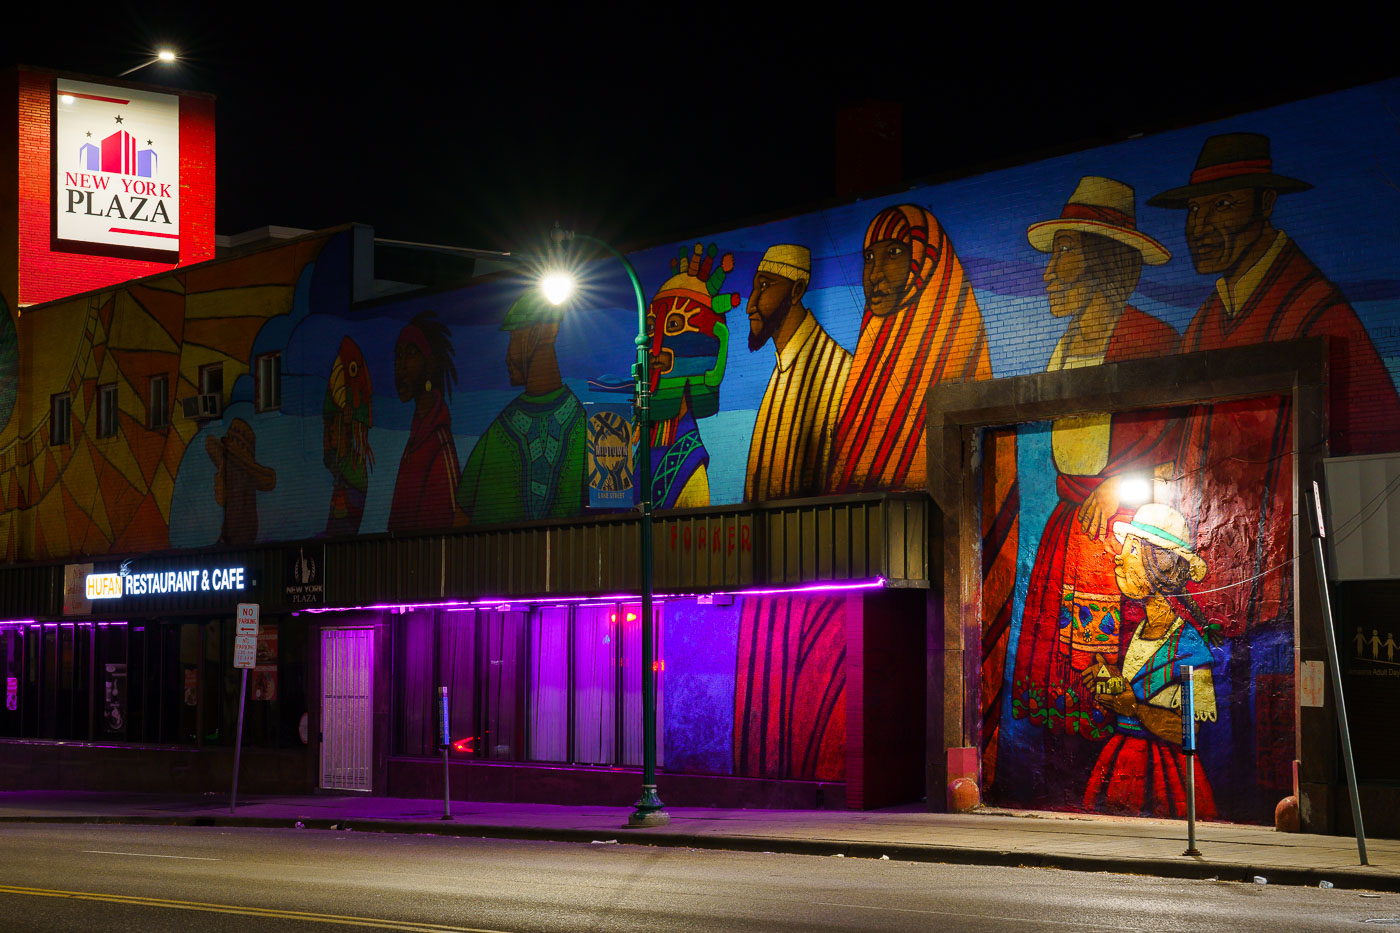 Large 2 story mural on street at night